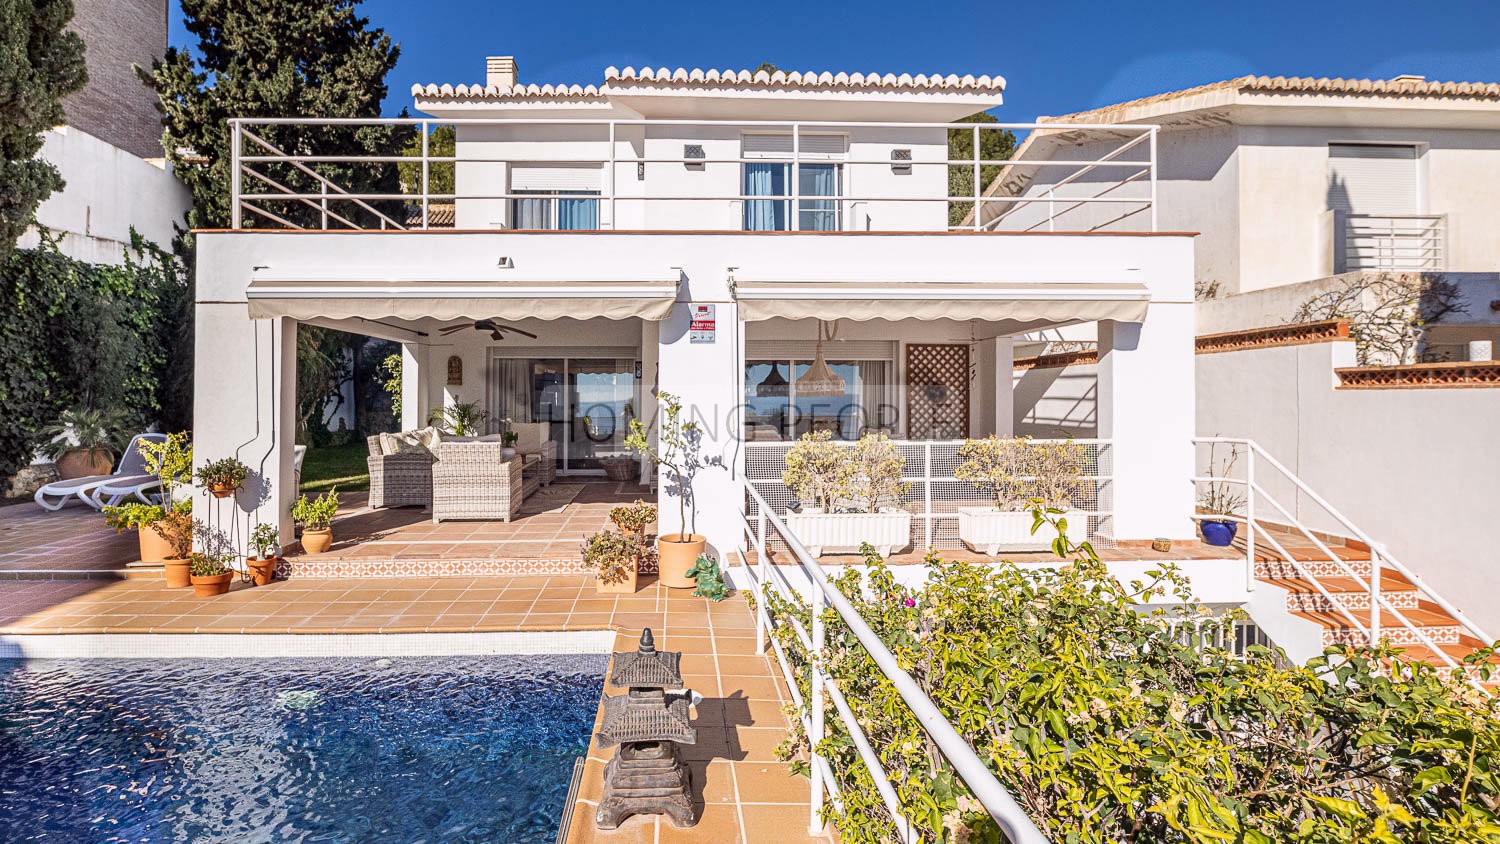 [SOLD] Semi-detached villa with pool, garden and views over the Mediterranean Sea